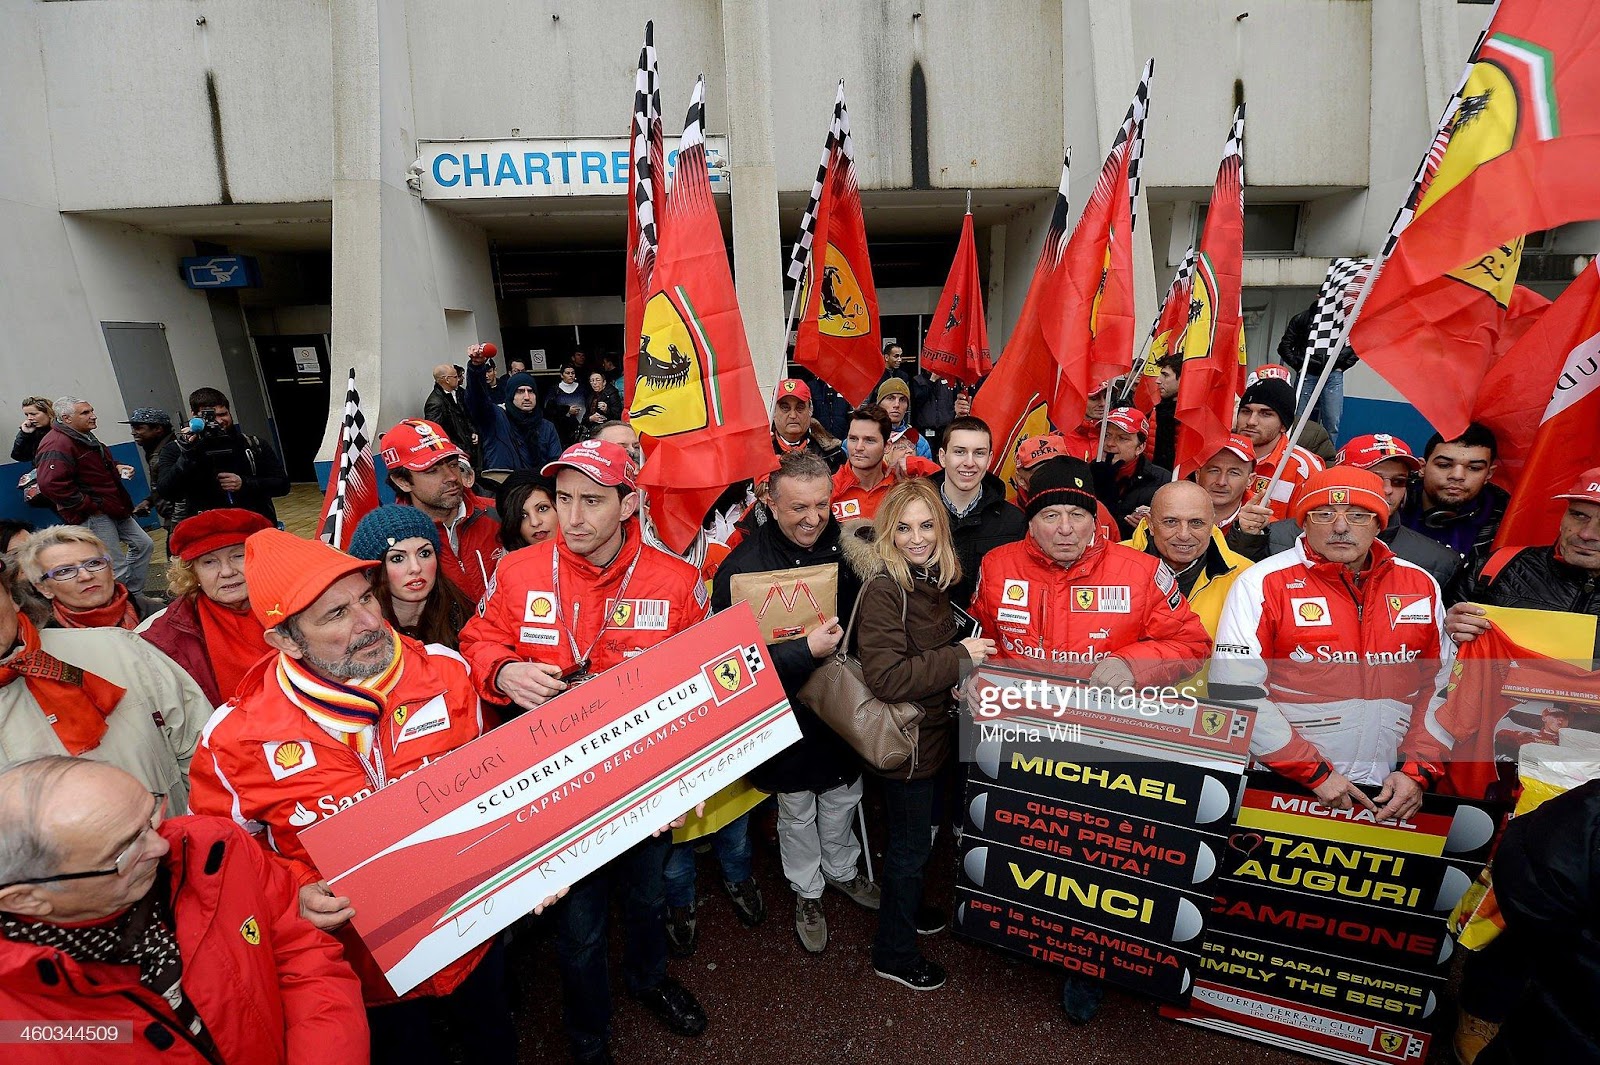 Fans gather in front of the main entrance of Grenoble University Hospital Centre where former German Formula One driver Michael Schumacher is being treated for a severe head injury following a skiing accident on January 3, 2014 in Grenoble, France.